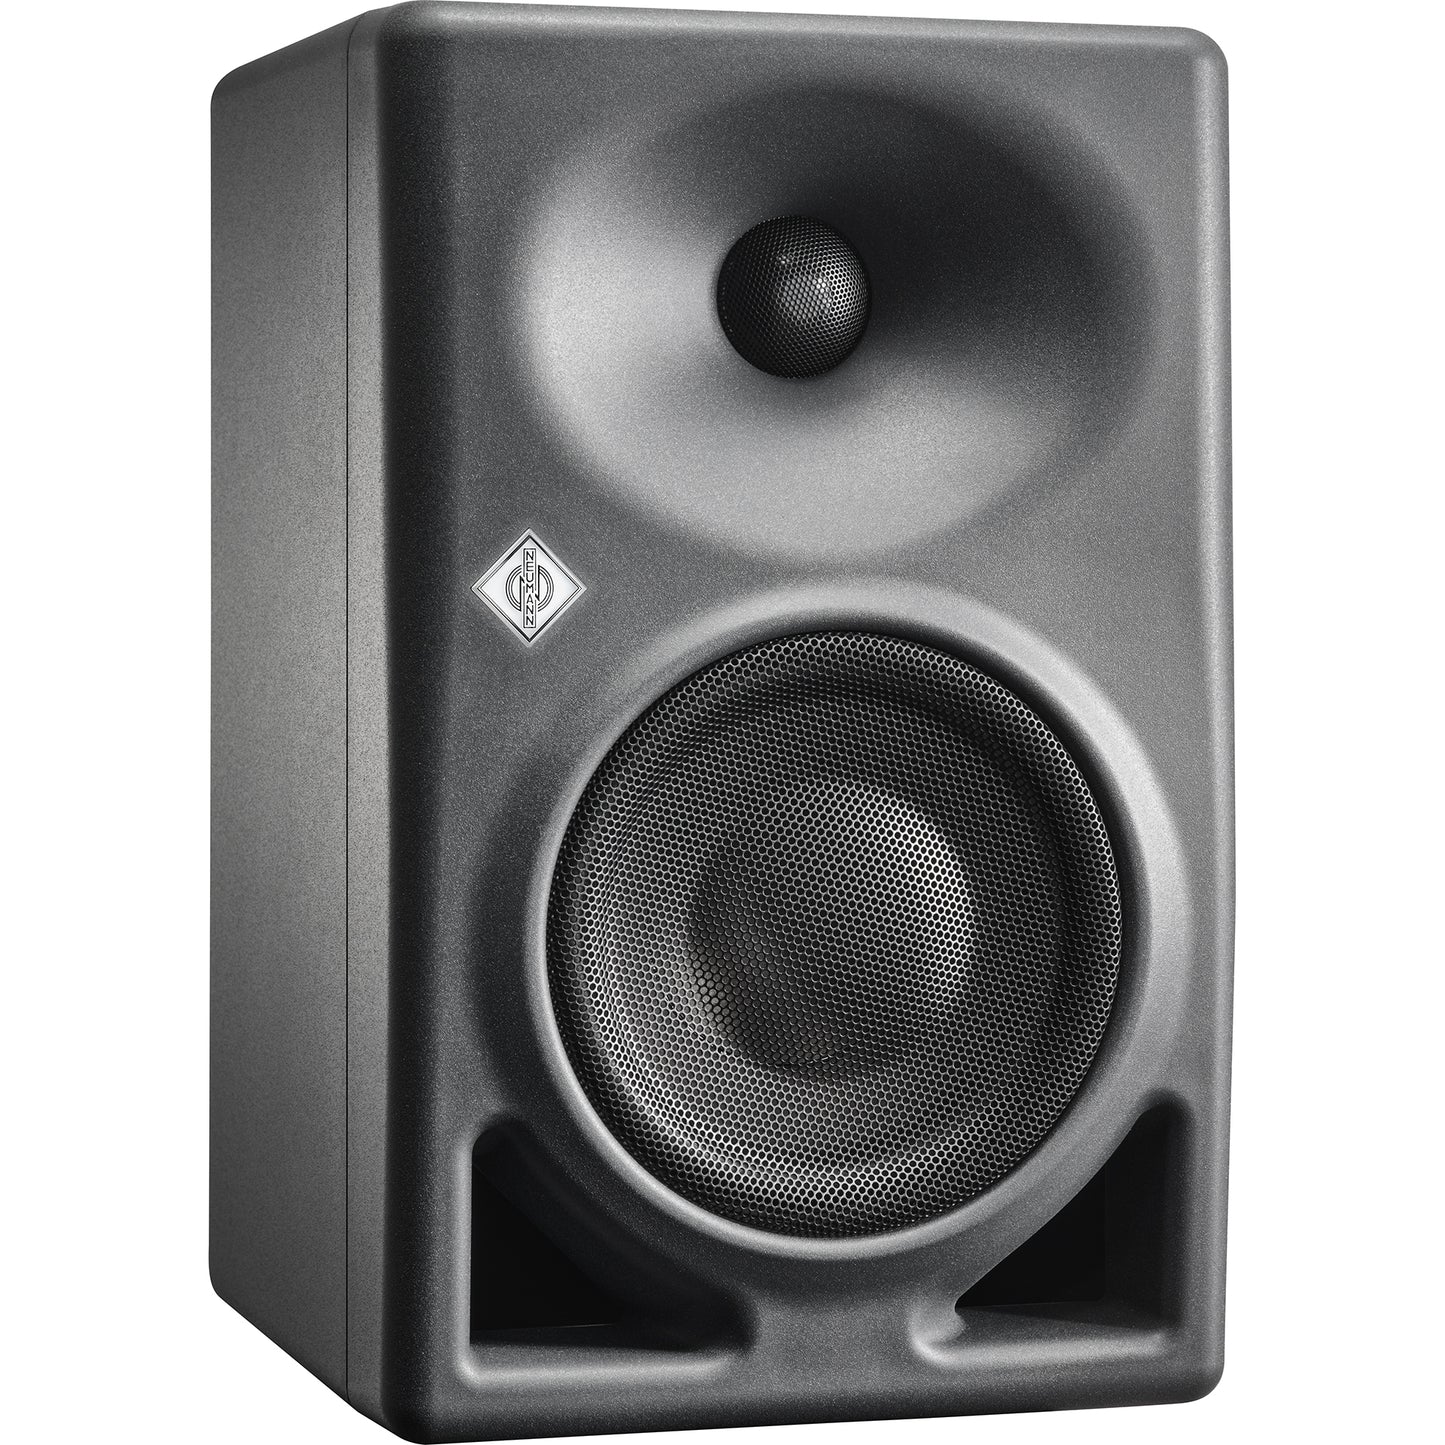 Neumann KH 120 II AES67 Two Way, DSP-powered Nearfied Monitor, Anthracite